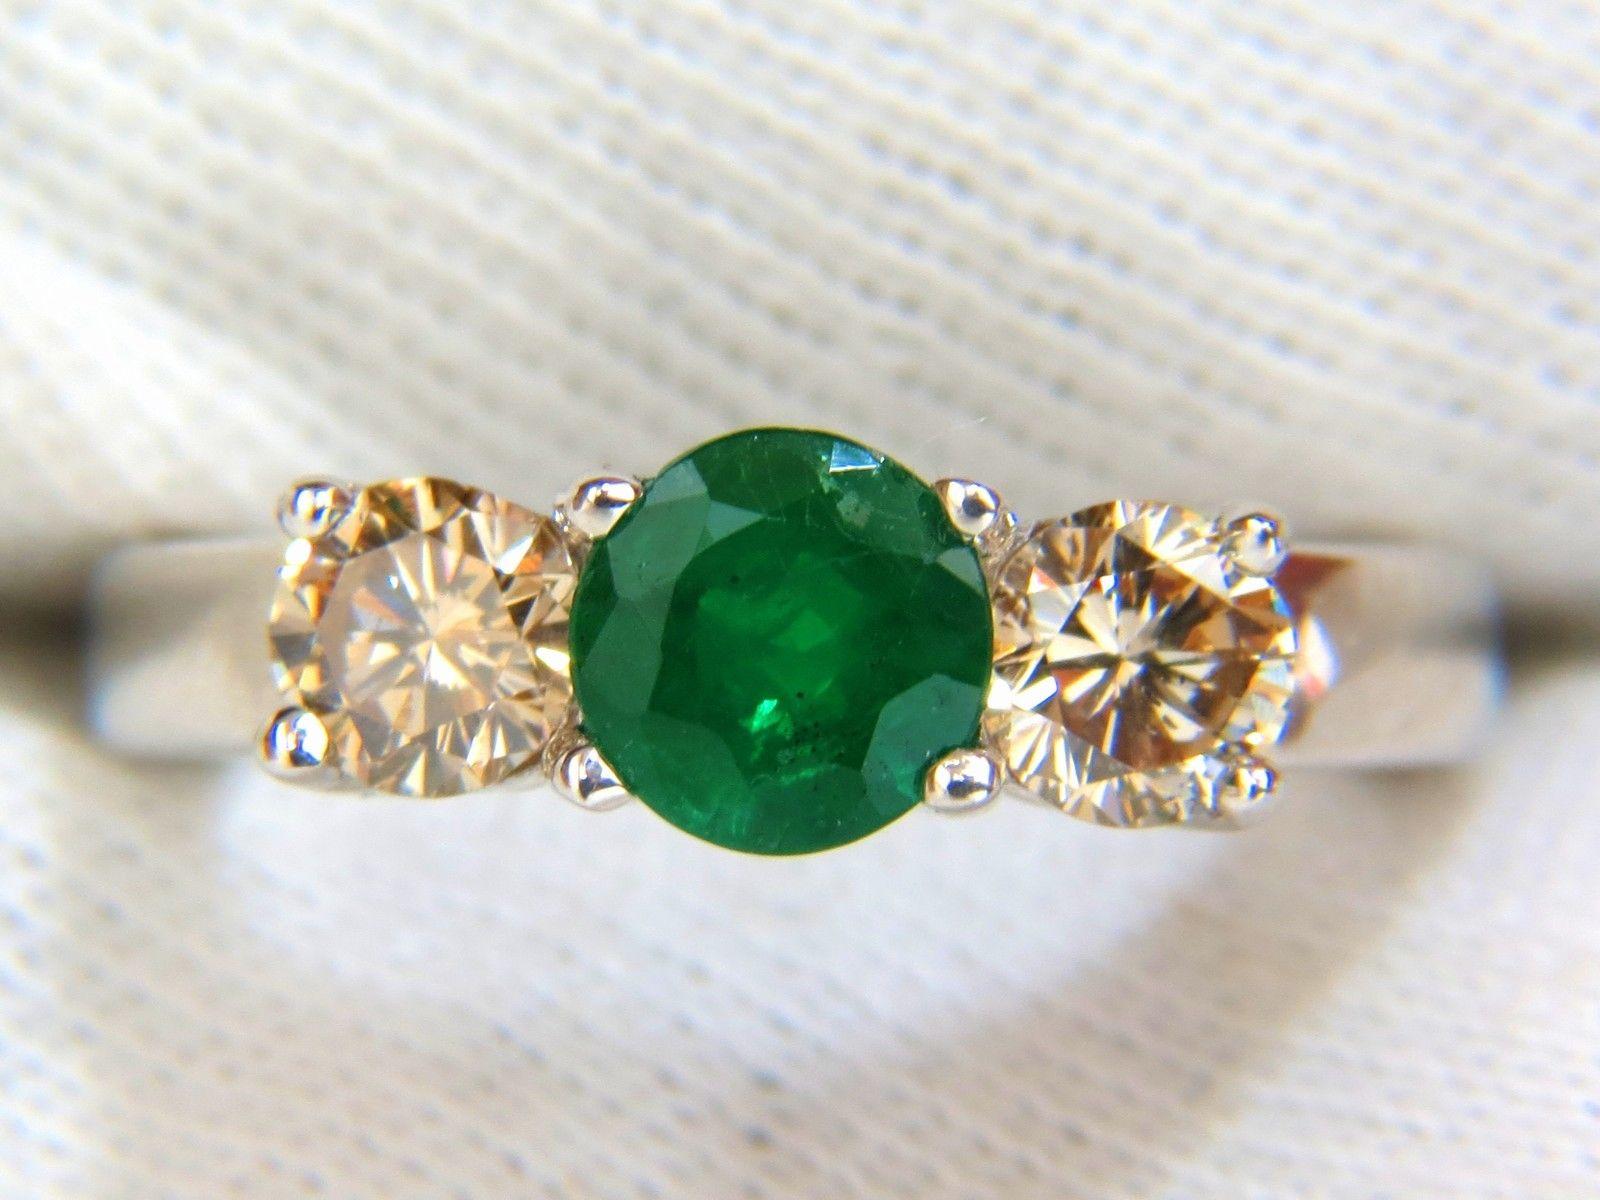 .90ct. Natural Emerald diamond ring

6.3mm Diameter

Transparent & Clean clarity.

Vibrant Green tone

Fully faceted round cut brilliant

  

Side Round, full cut diamonds:

1.00ct. 

Fancy Natural Light Brown

Vs-2 Clarity.

14kt. white gold.

6.5